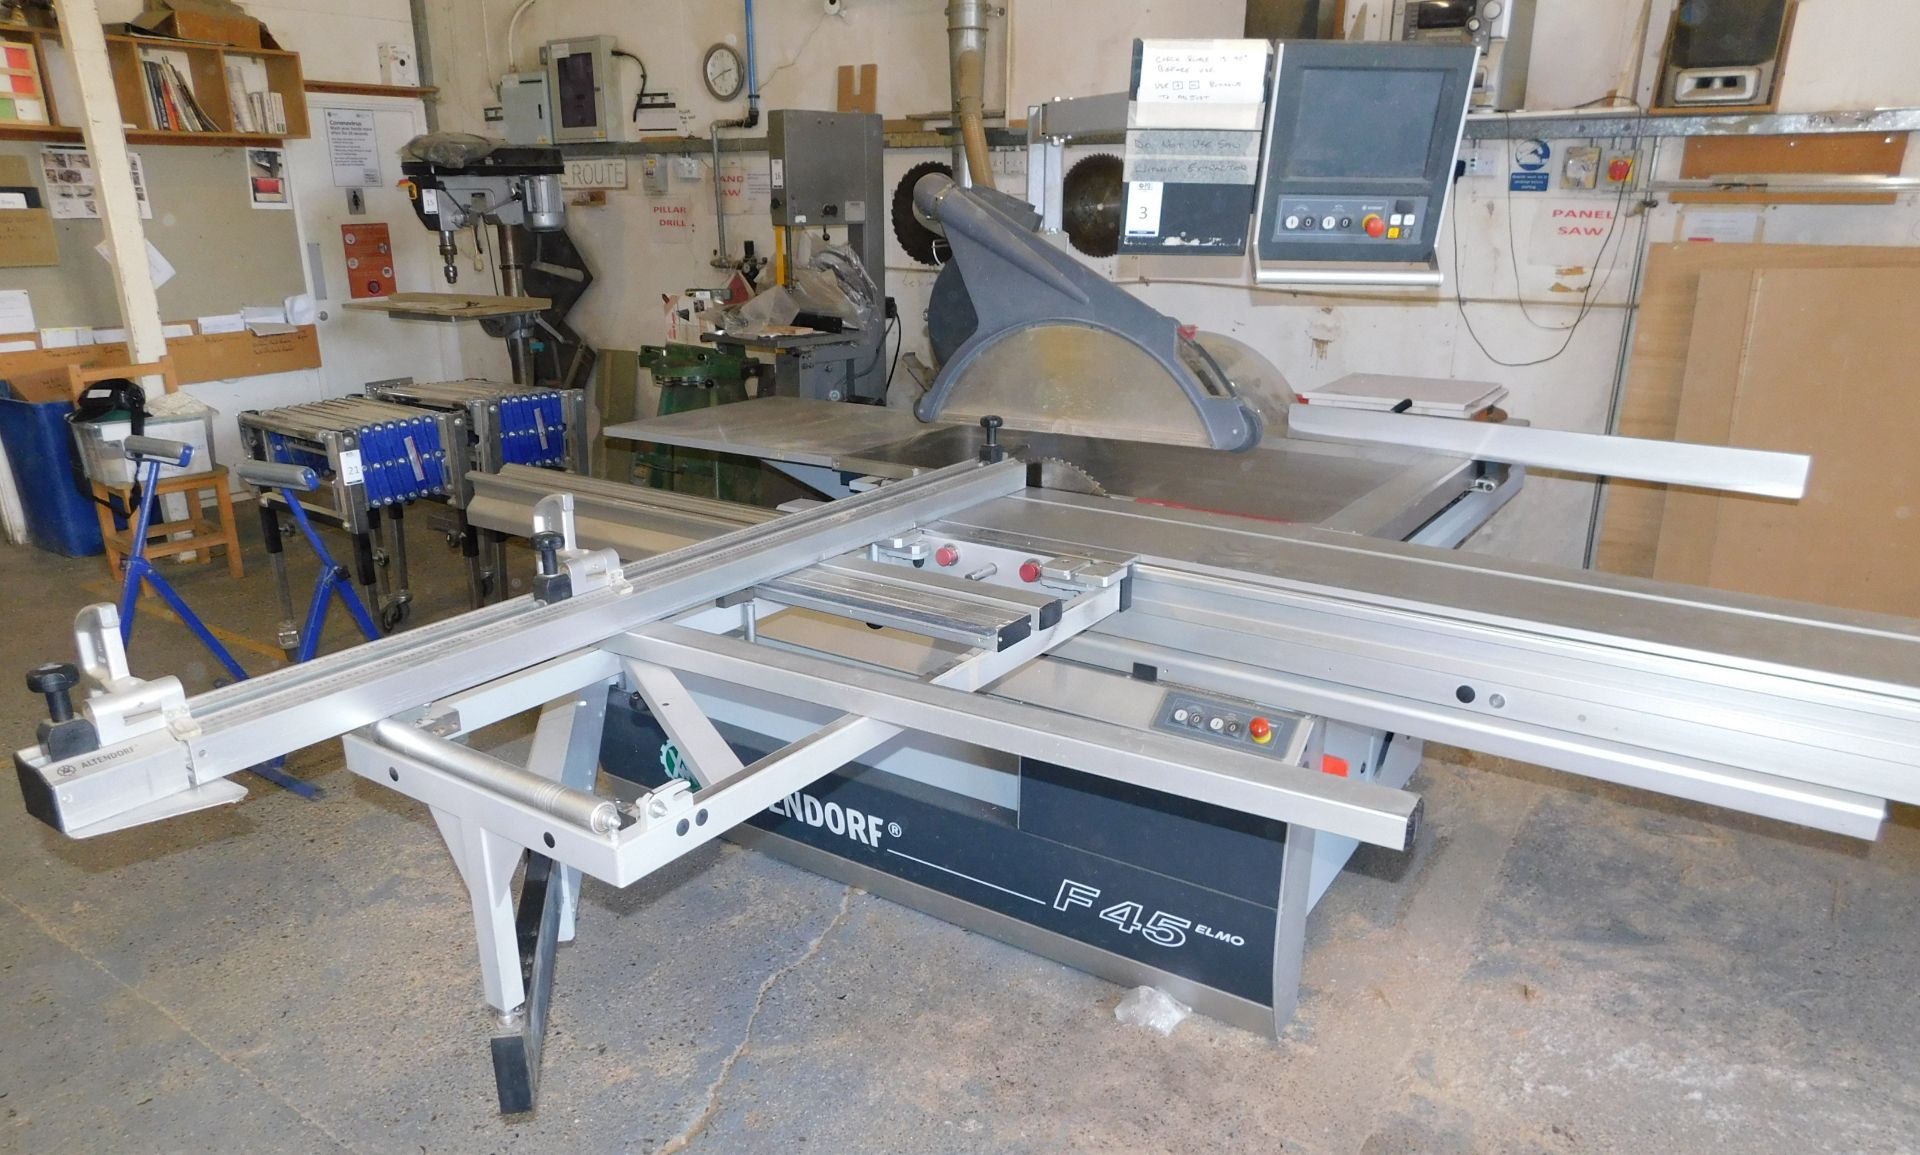 Altendorf F45 Elmo III Sliding Table Saw (2012) Serial Number 12-07-10-056 With Rise/Fall & Tilt